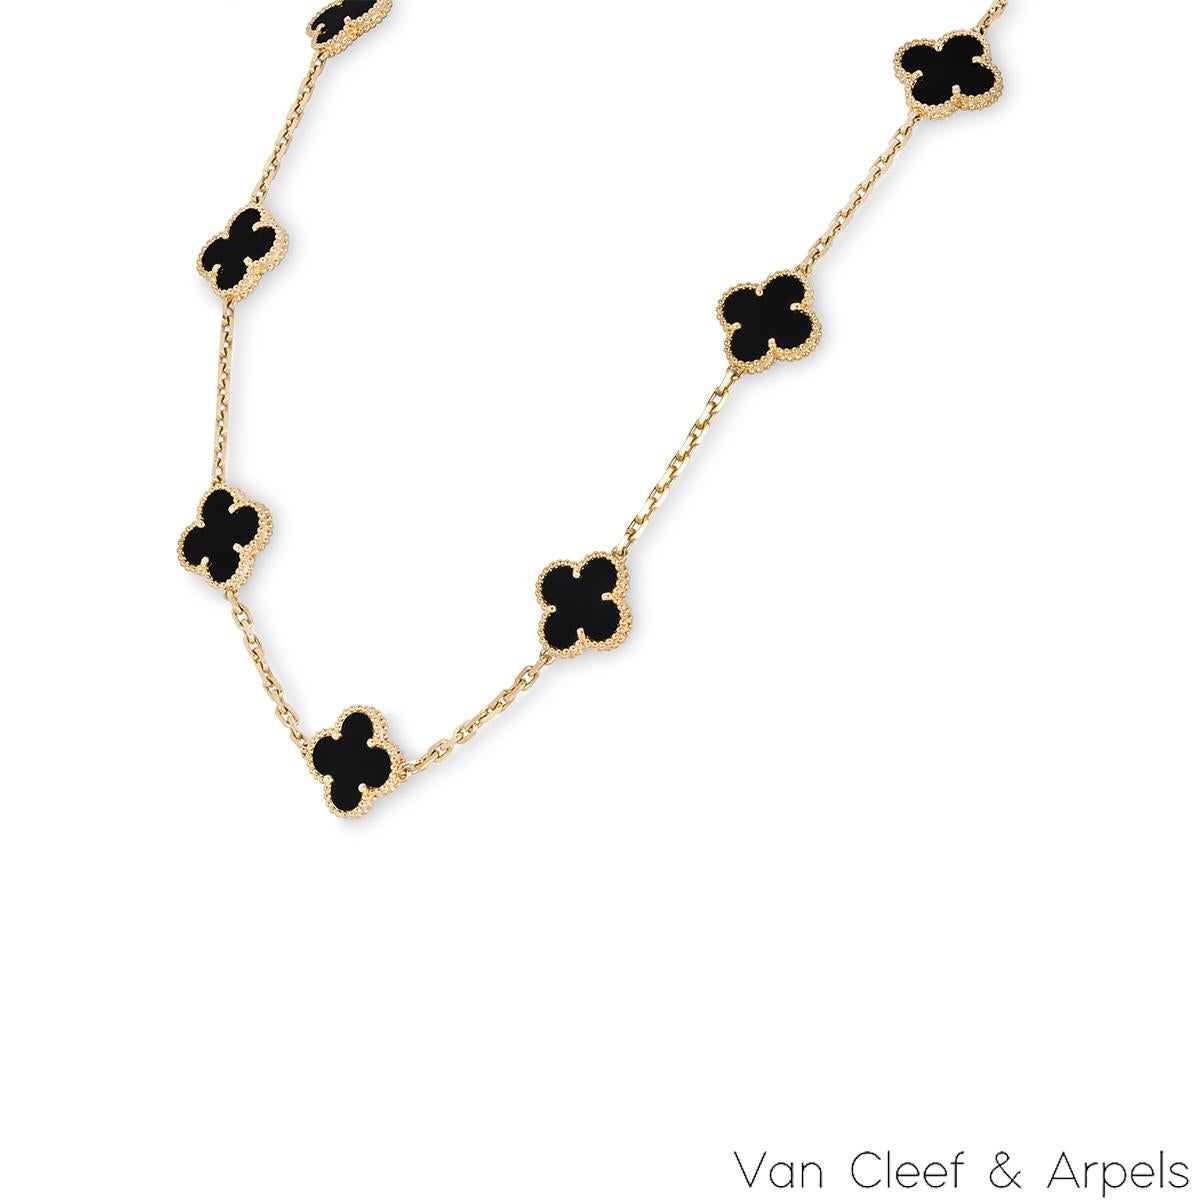 An iconic 18k yellow gold and onyx Van Cleef and Arpels necklace from the Vintage Alhambra collection. The necklace comprises of 10 iconic 4 leaf clover motifs, each set with a beaded edge and an onyx inlay. The necklace measures 16.5 inches in